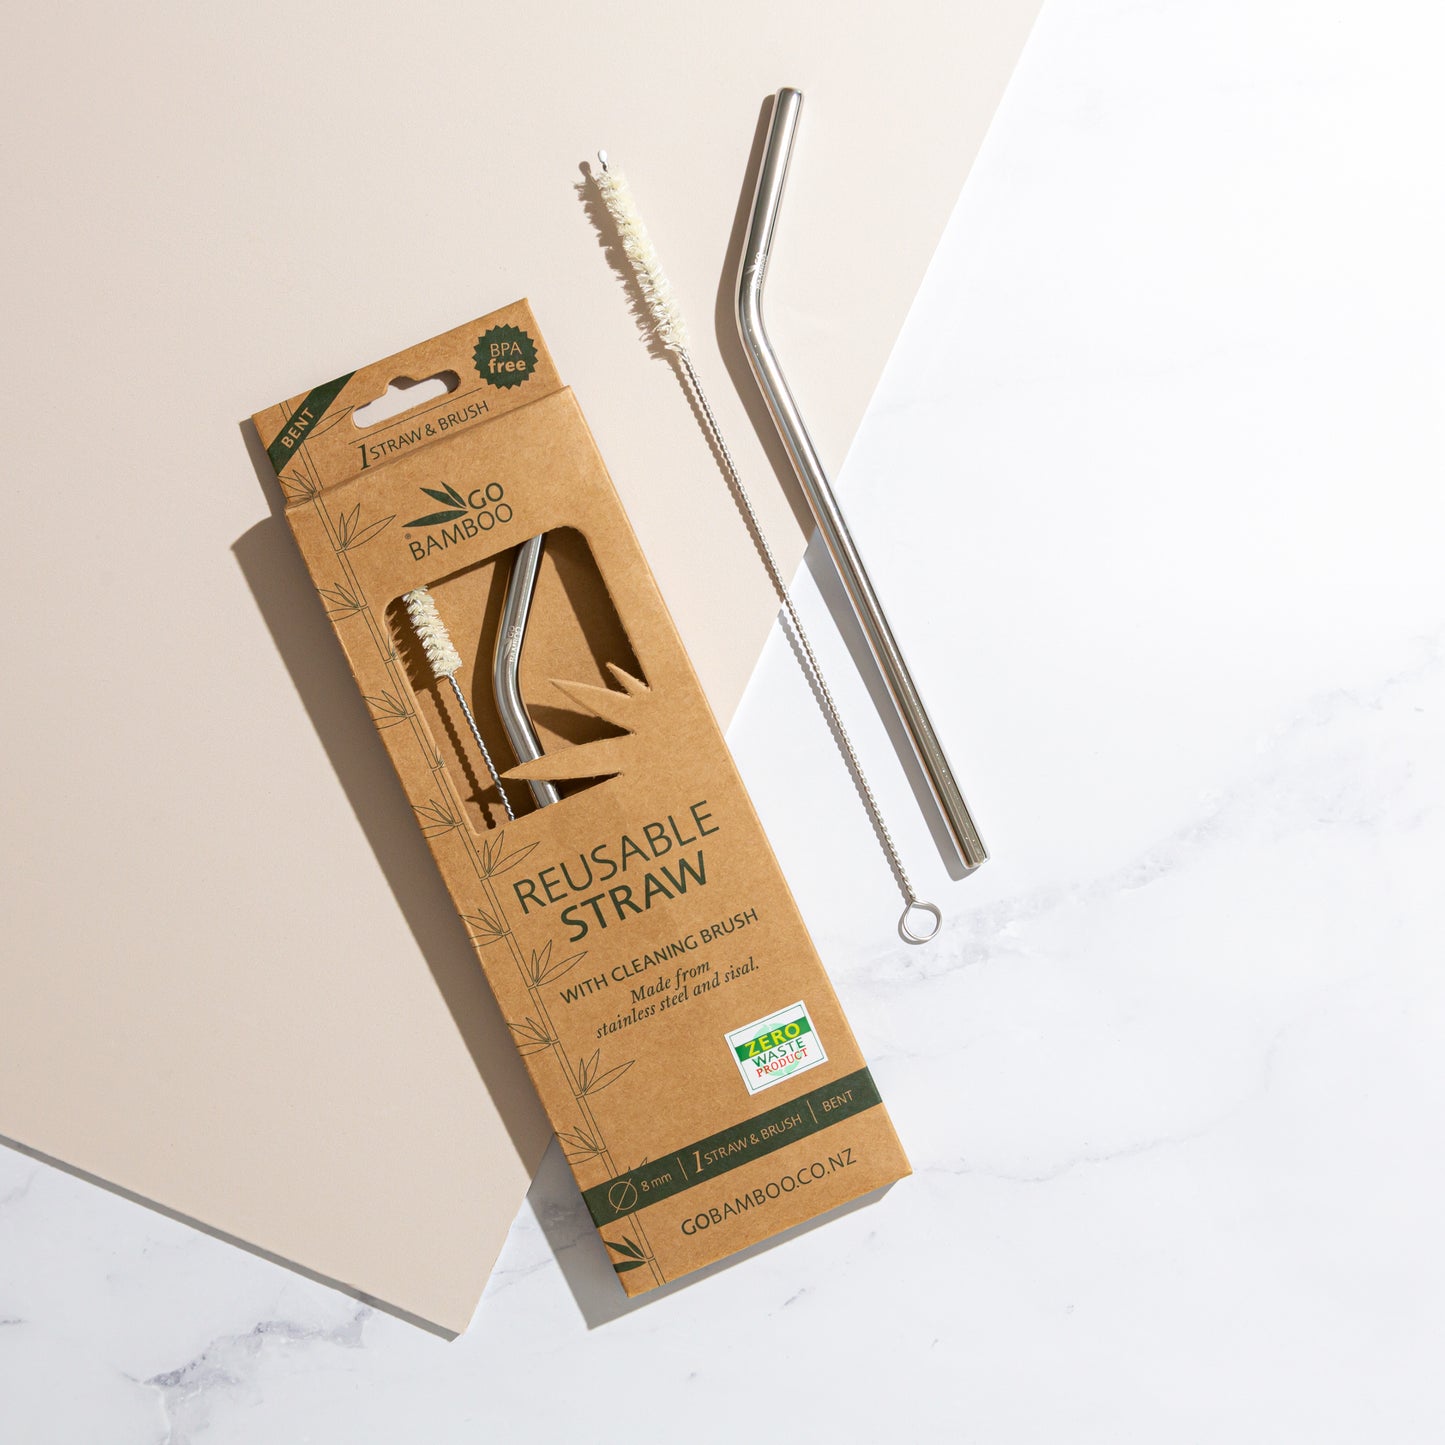 Stainless Steel Straws - Reusable Stainless Steel Straws - Go Bamboo